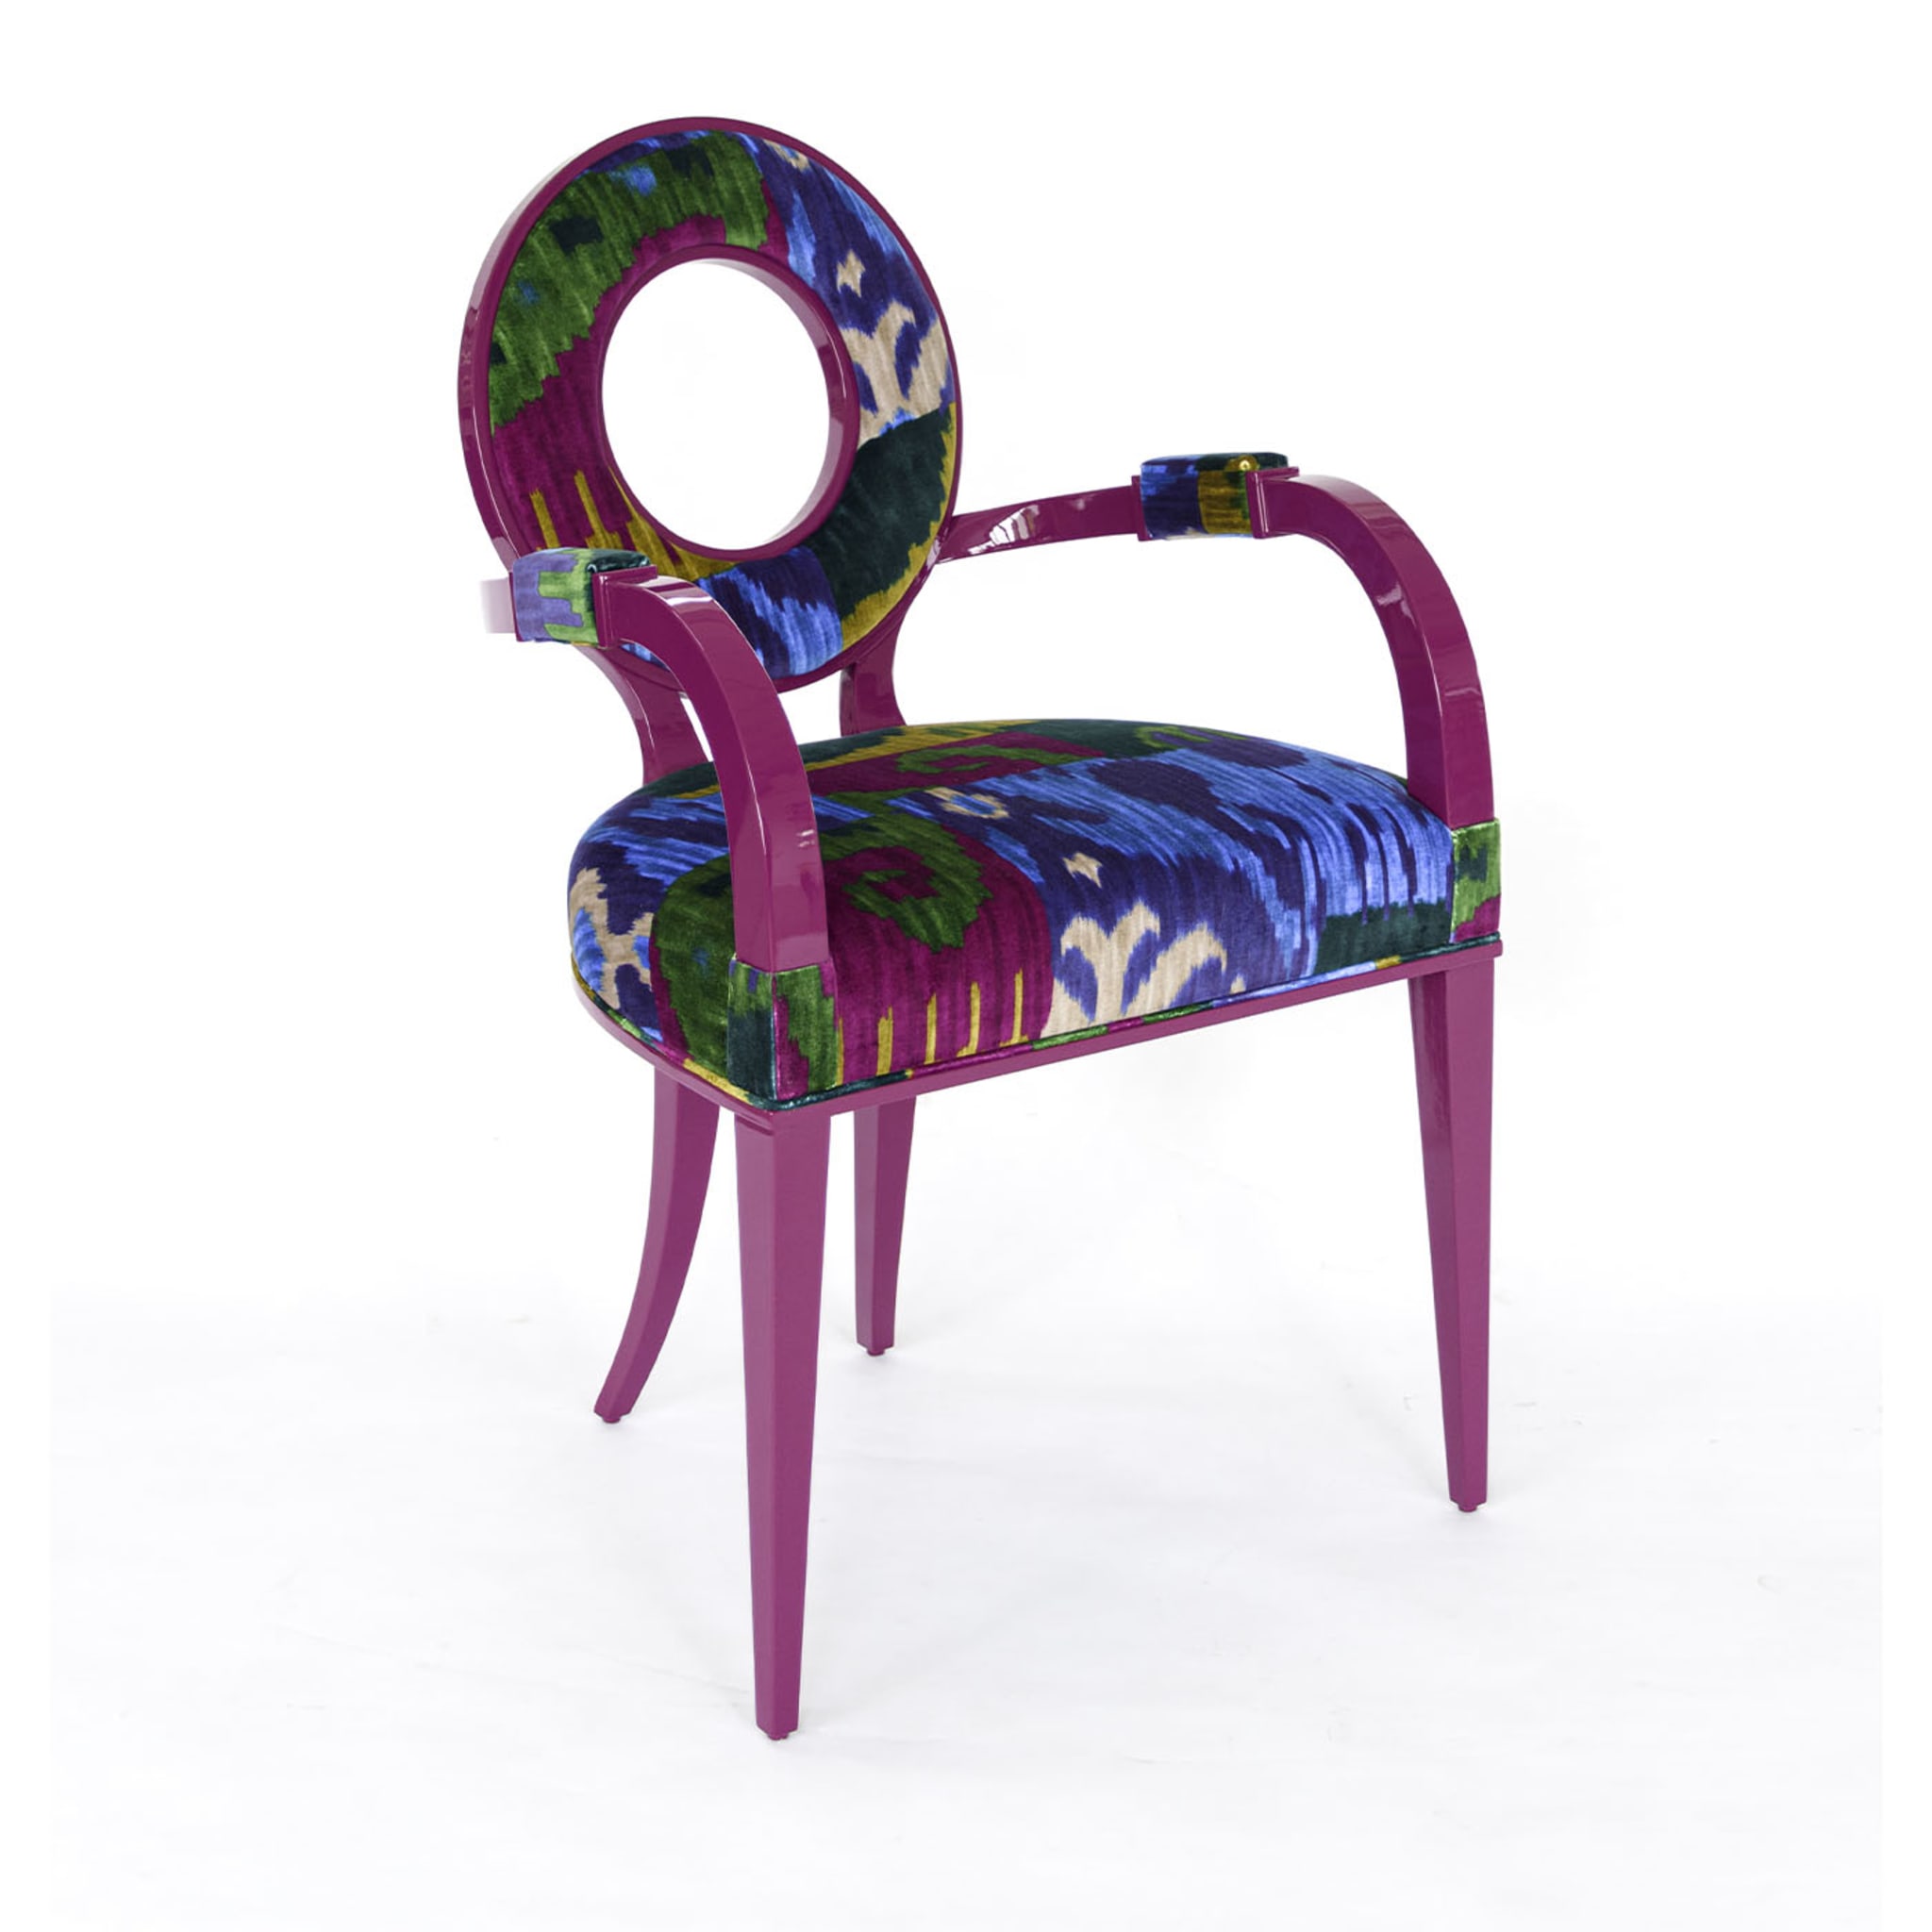 New Moon Magenta Chair With Armrests - Alternative view 4